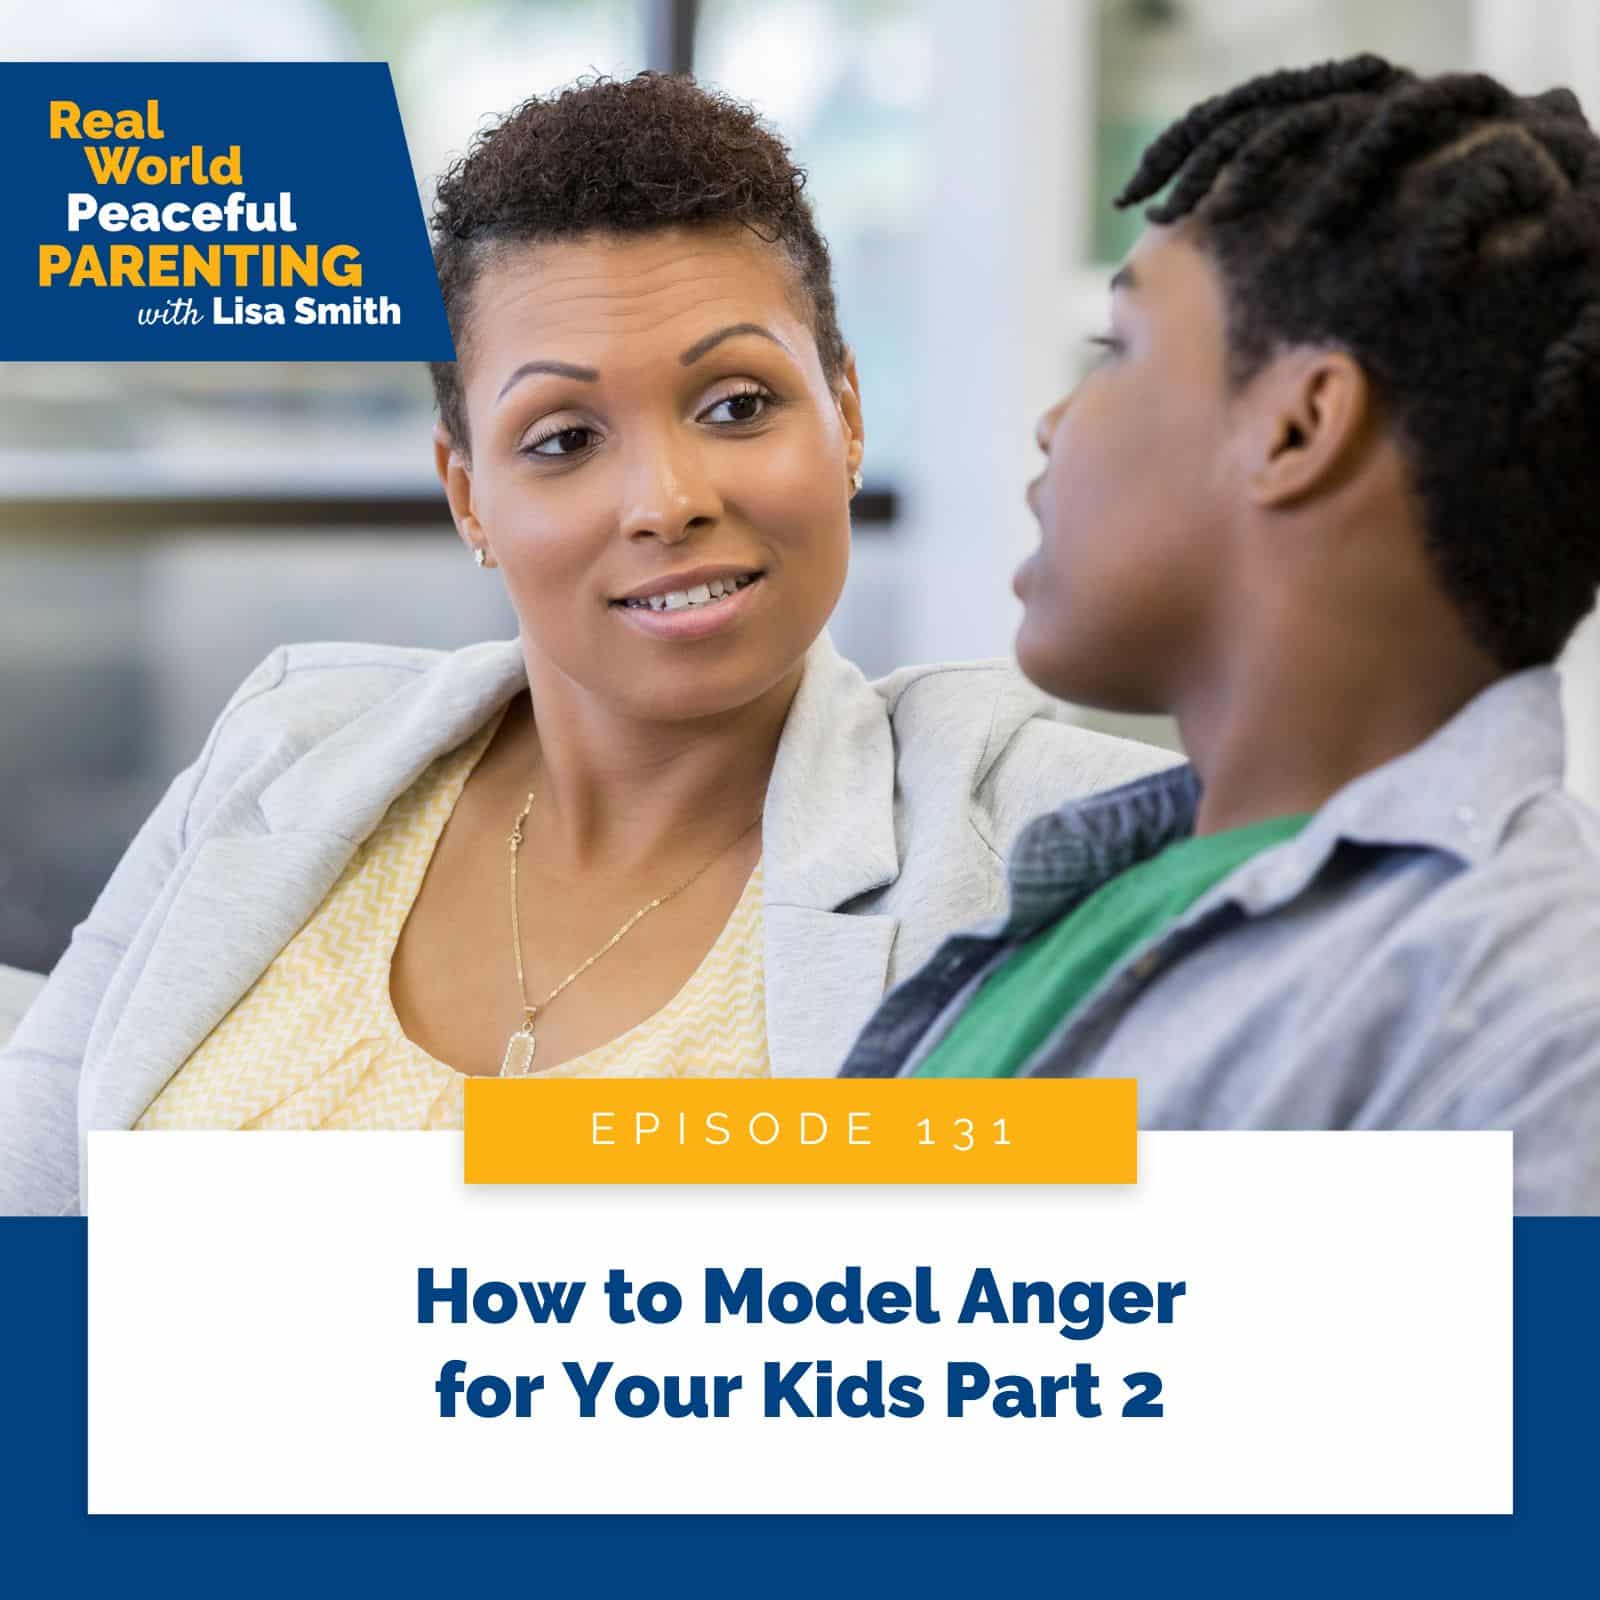 Real World Peaceful Parenting Lisa Smith | How to Model Anger for Your Kids Part 2